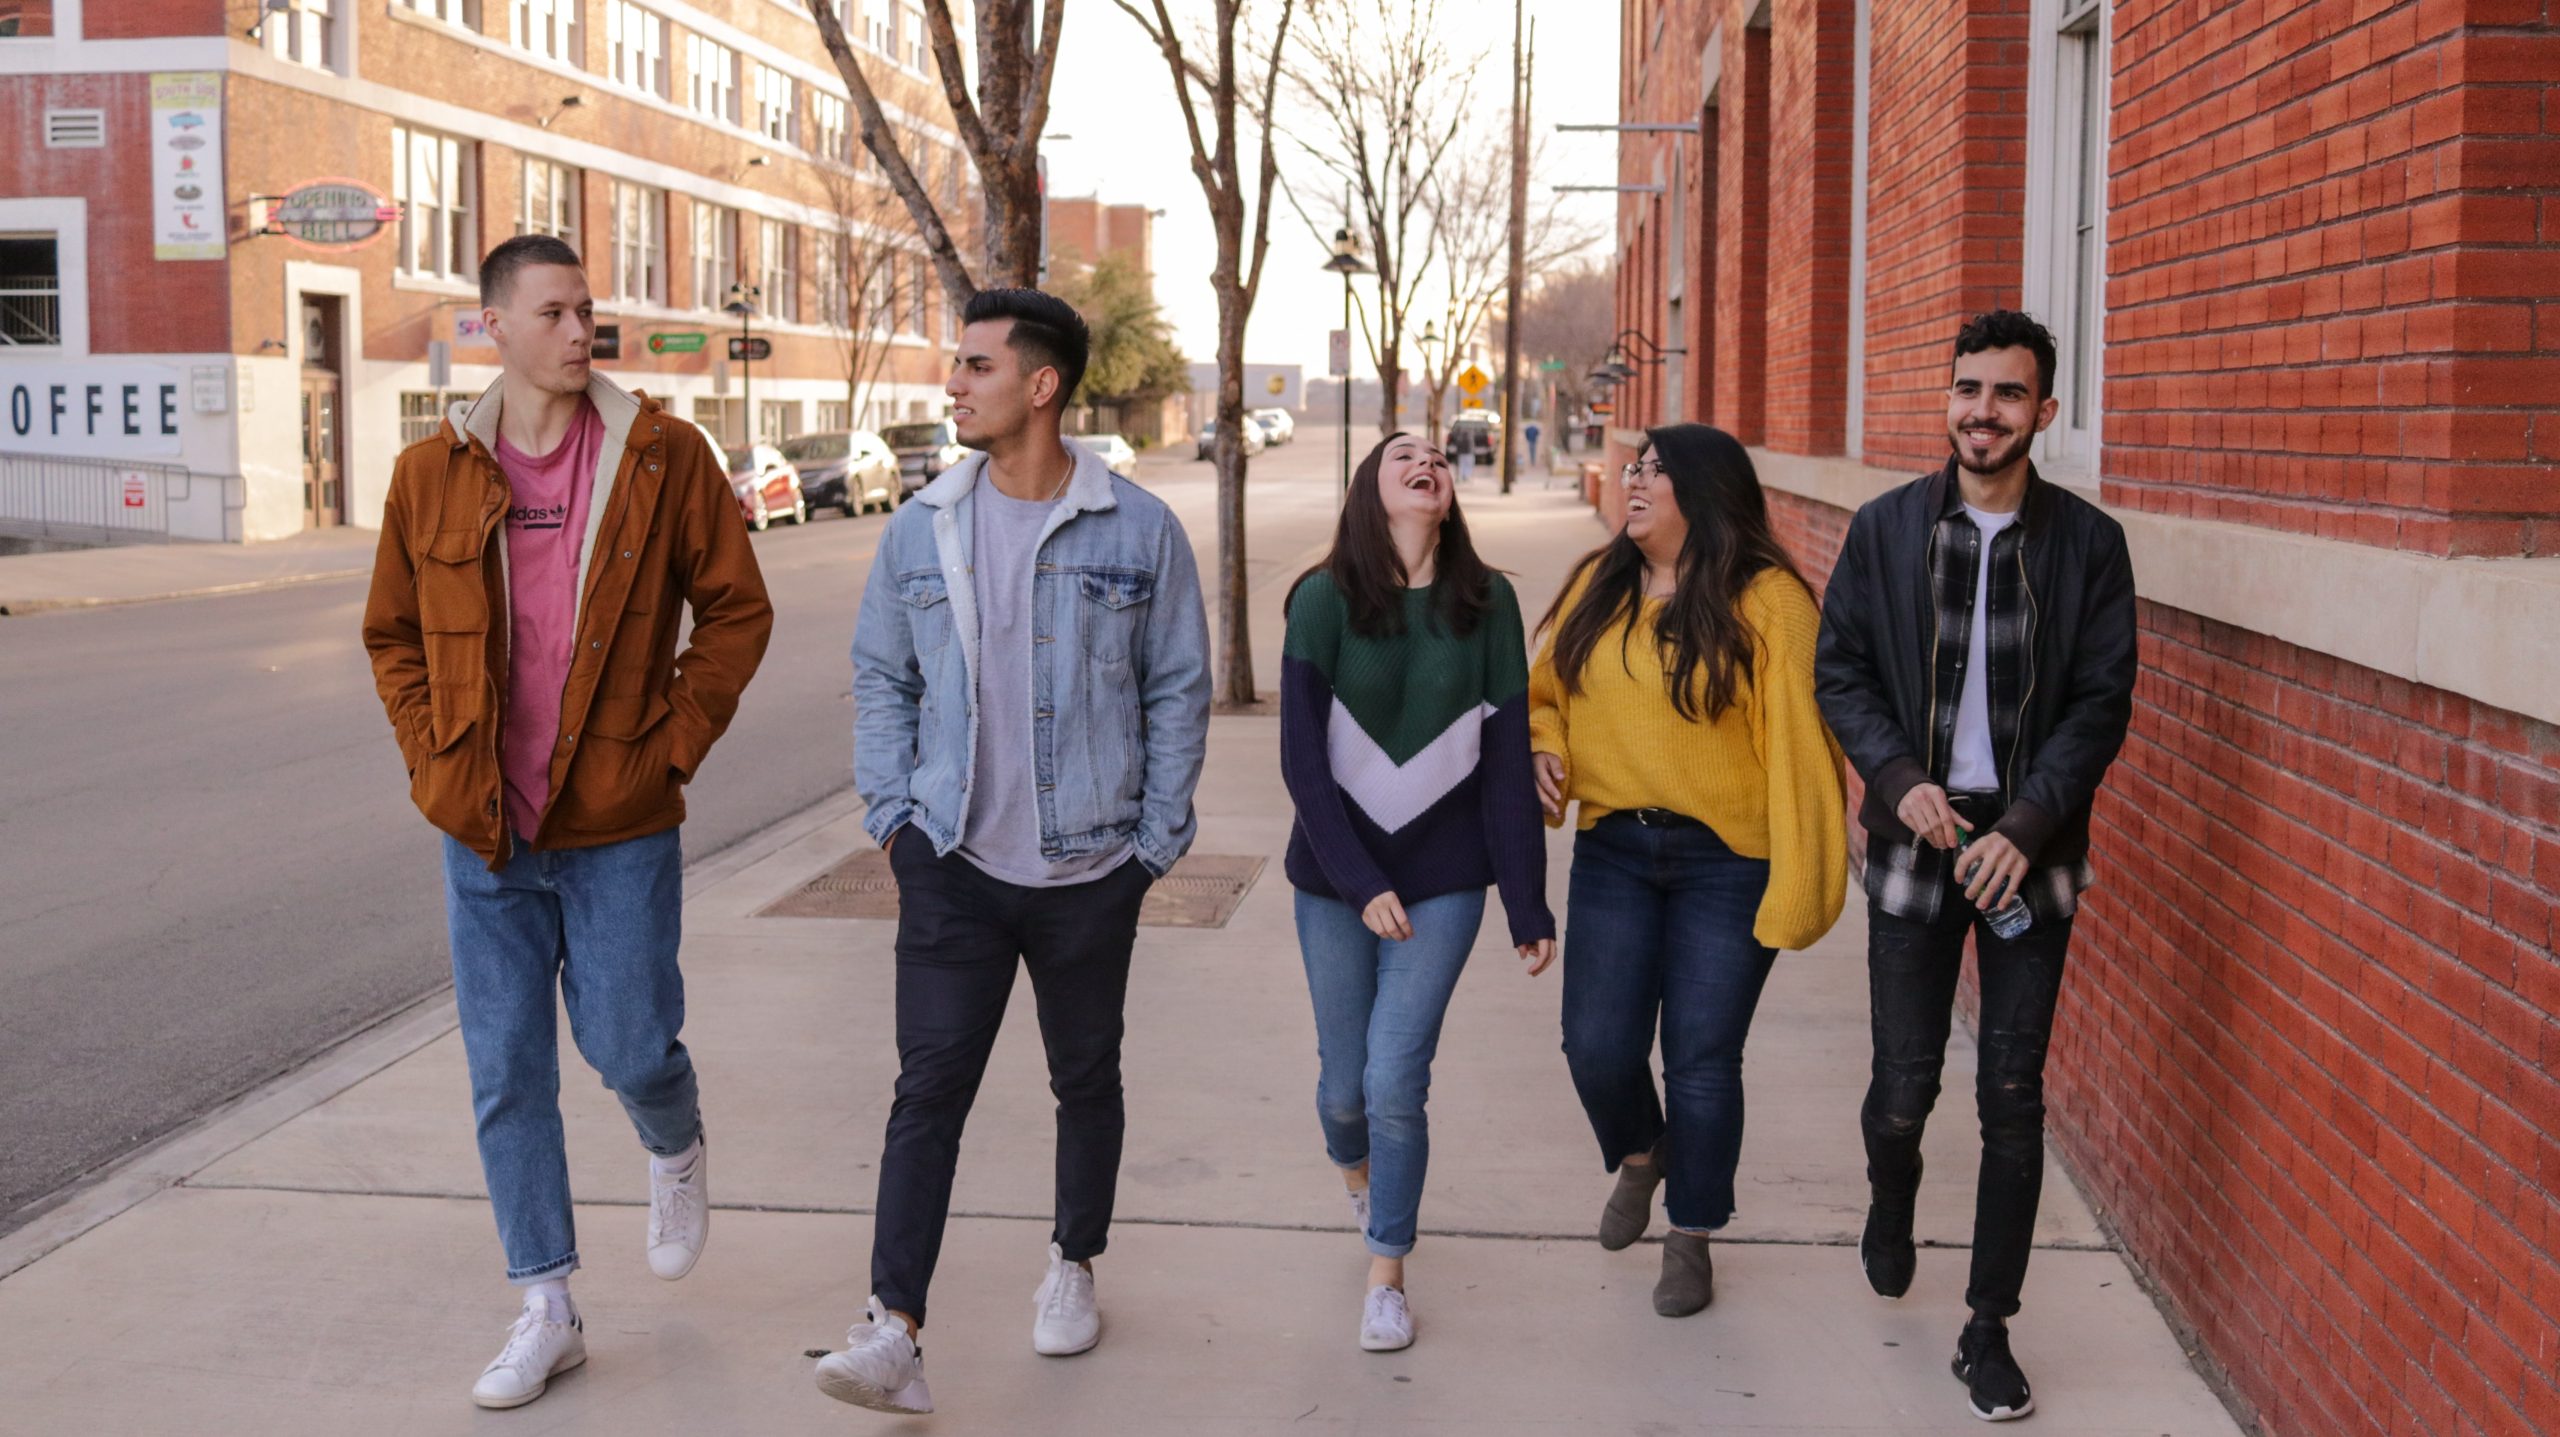 Before signing your student apartment lease, you should keep a few things in mind — safety. Here are some tips for staying safe in your off-campus apartment neighborhood.